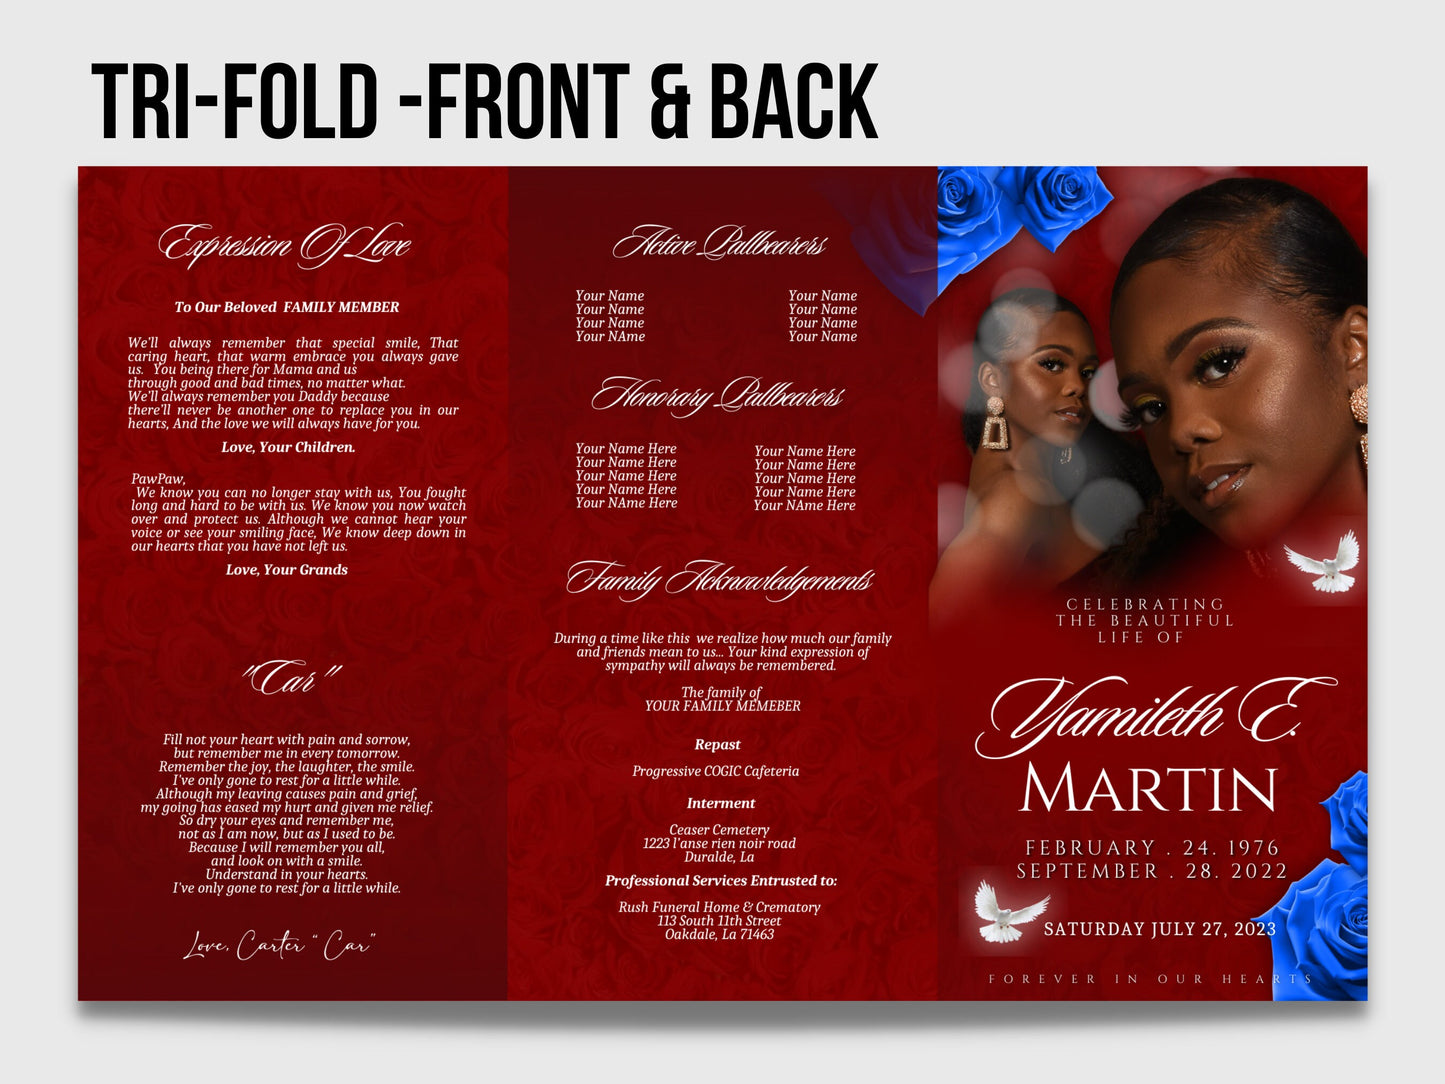 17"x11" FUNERAL OBITUARY TEMPLATE (2 pages) |Elegant Style Funeral Program | Celebration of Life |Keepsake |Digital Download |Canva Template